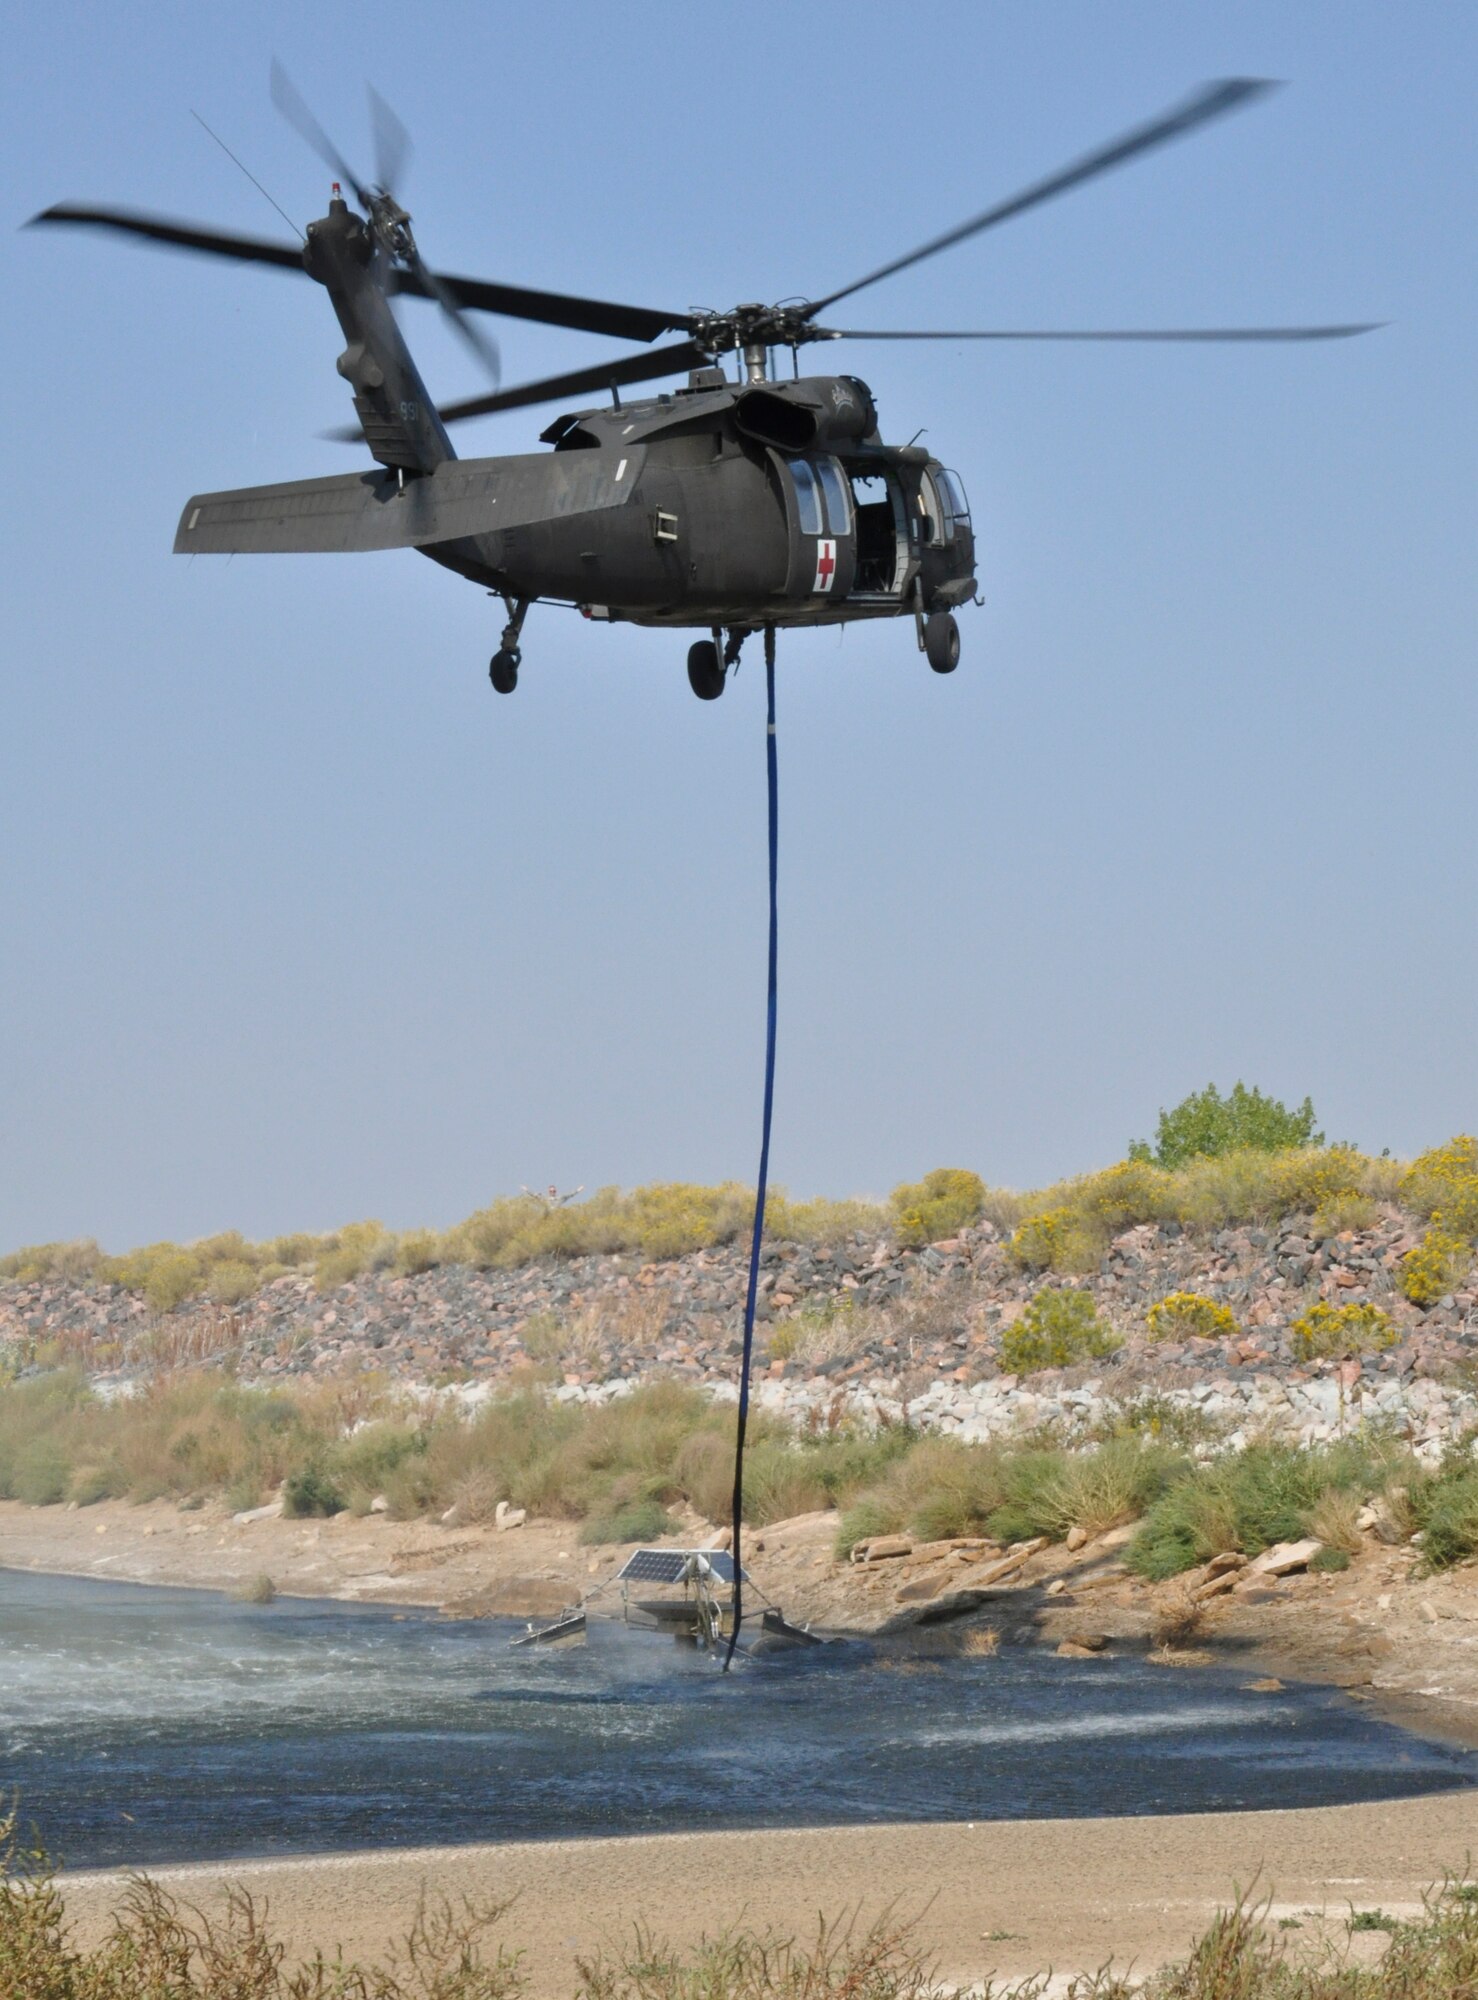 BUCKLEY AIR FORCE BASE, Colo. – A Colorado Army National Guard UH-60 Black Hawk helicopter lifts a non-functioning aerator from Lake Williams Sept. 20, 2012. “The removal of the aerator has the potential to save lives by aiding flight safety in the reduction of birds perching on the open water of Lake Williams,” explained Krystal Phillips, 460th Civil Engineer Squadron fish and wildlife biologist.  “This is a critical component of the Air Force and Buckley Air Force Base Bird Air Strike Hazard program.” (U.S. Air Force photo by Staff Sgt. Nicholas Rau)  